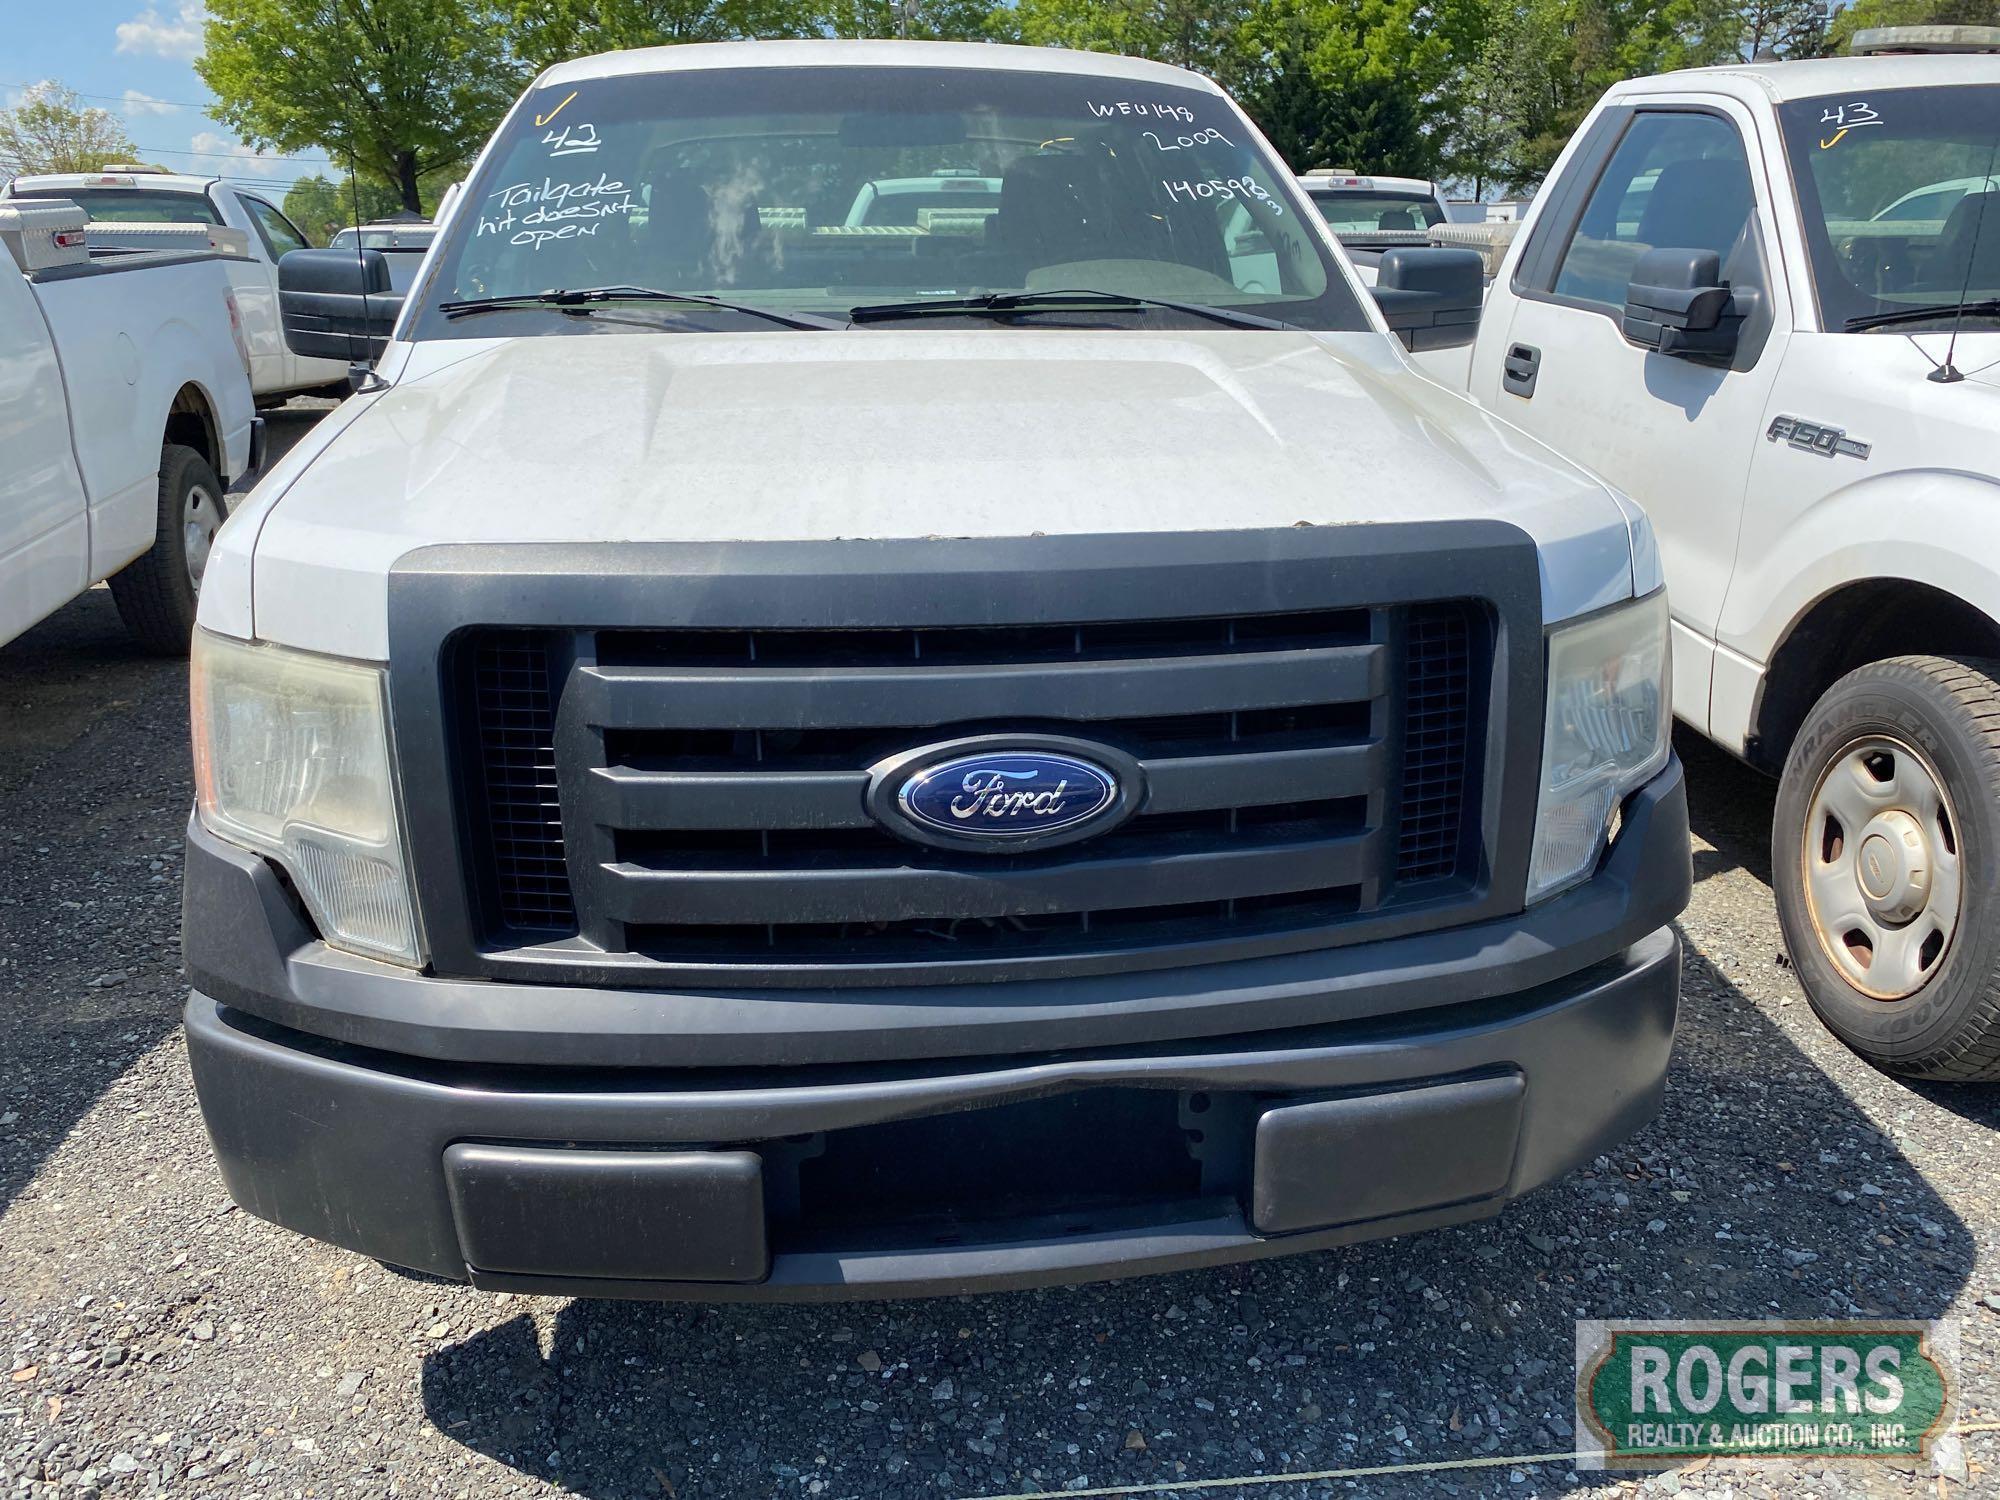 2009 FORD PICKUP TRUCK